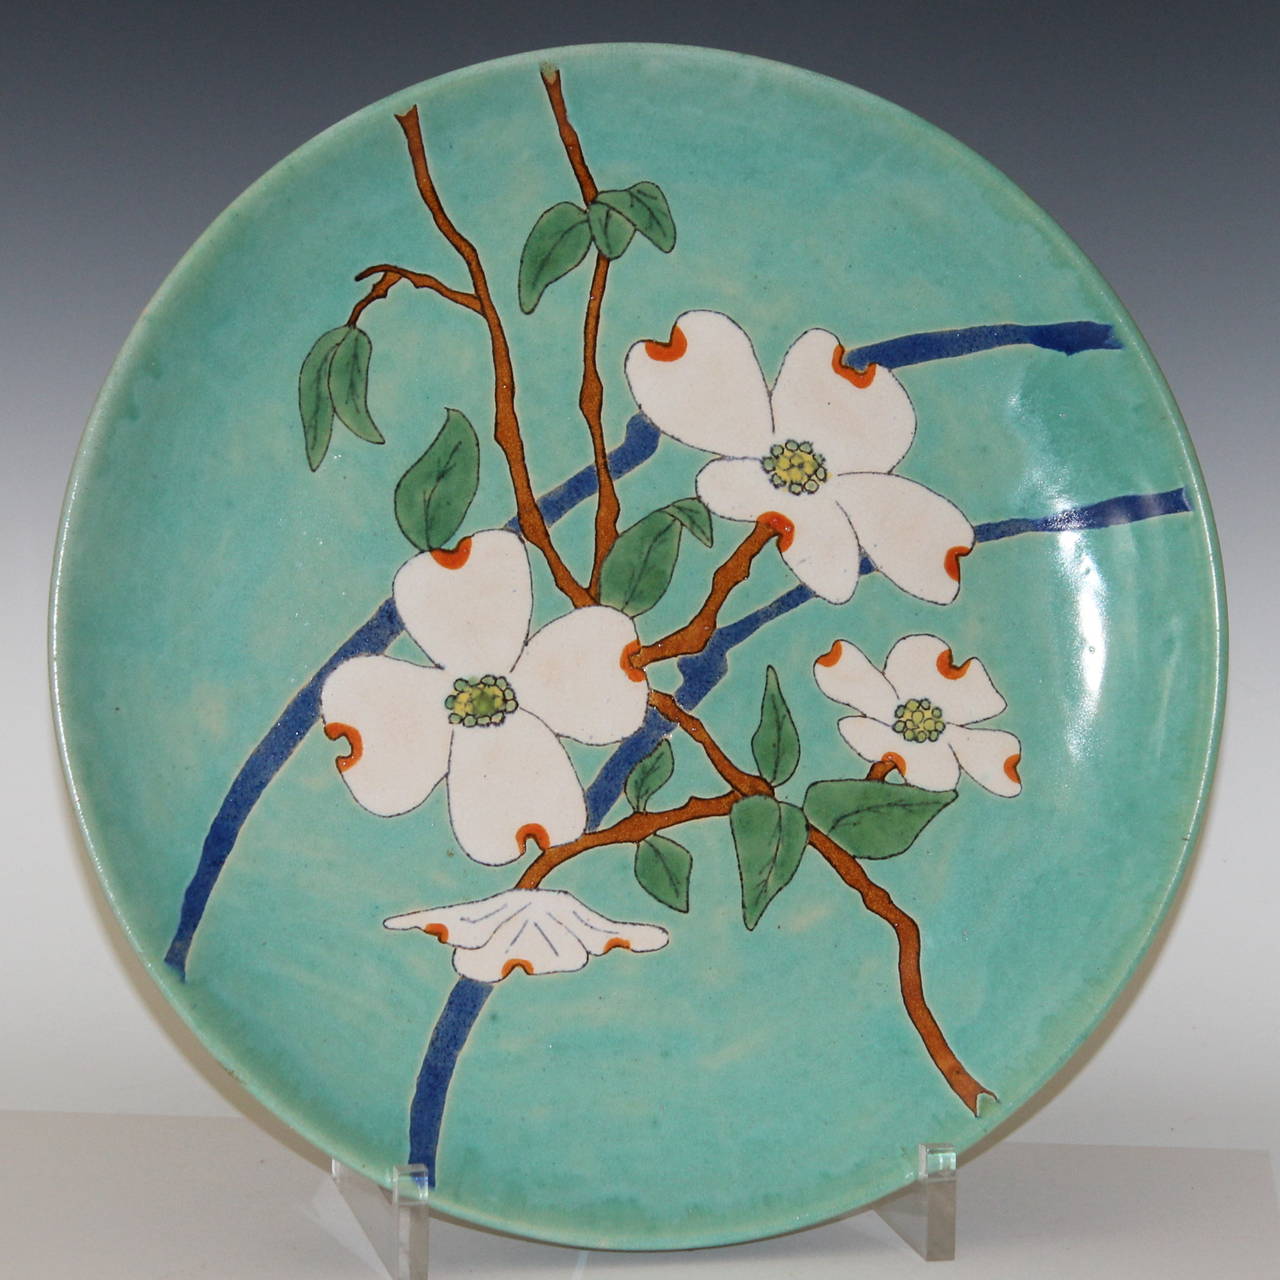 Large San Jose Mission pottery bowl or charger, circa 1930s. Decorated with dogwood blossoms on a turquoise/aqua ground. Signed on back with San Jose Mission aloe plant mark. 14 3/4